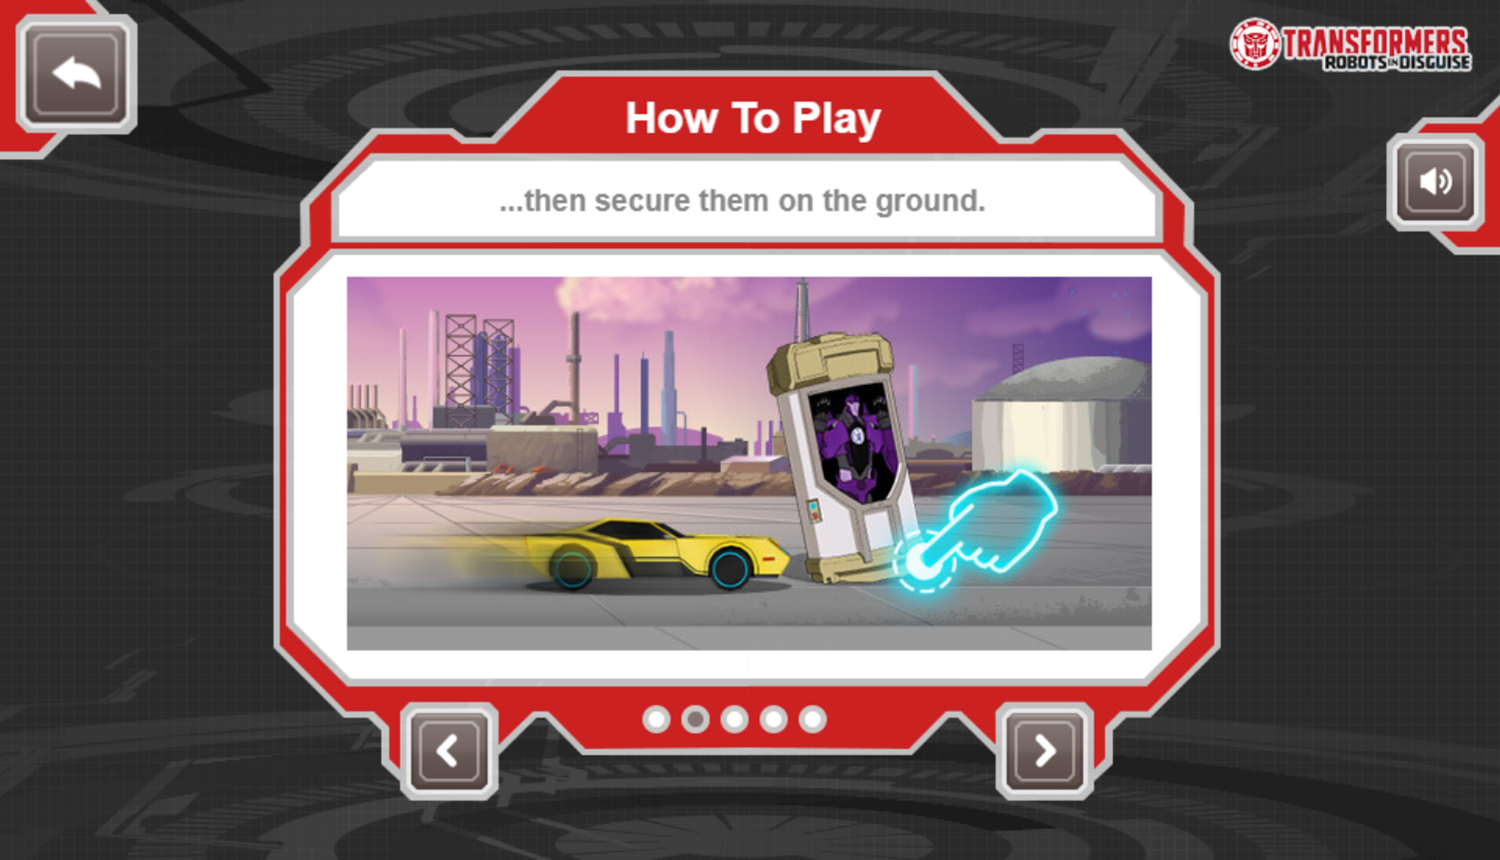 Transformers Protect Crown City Game Instructions Screenshot.